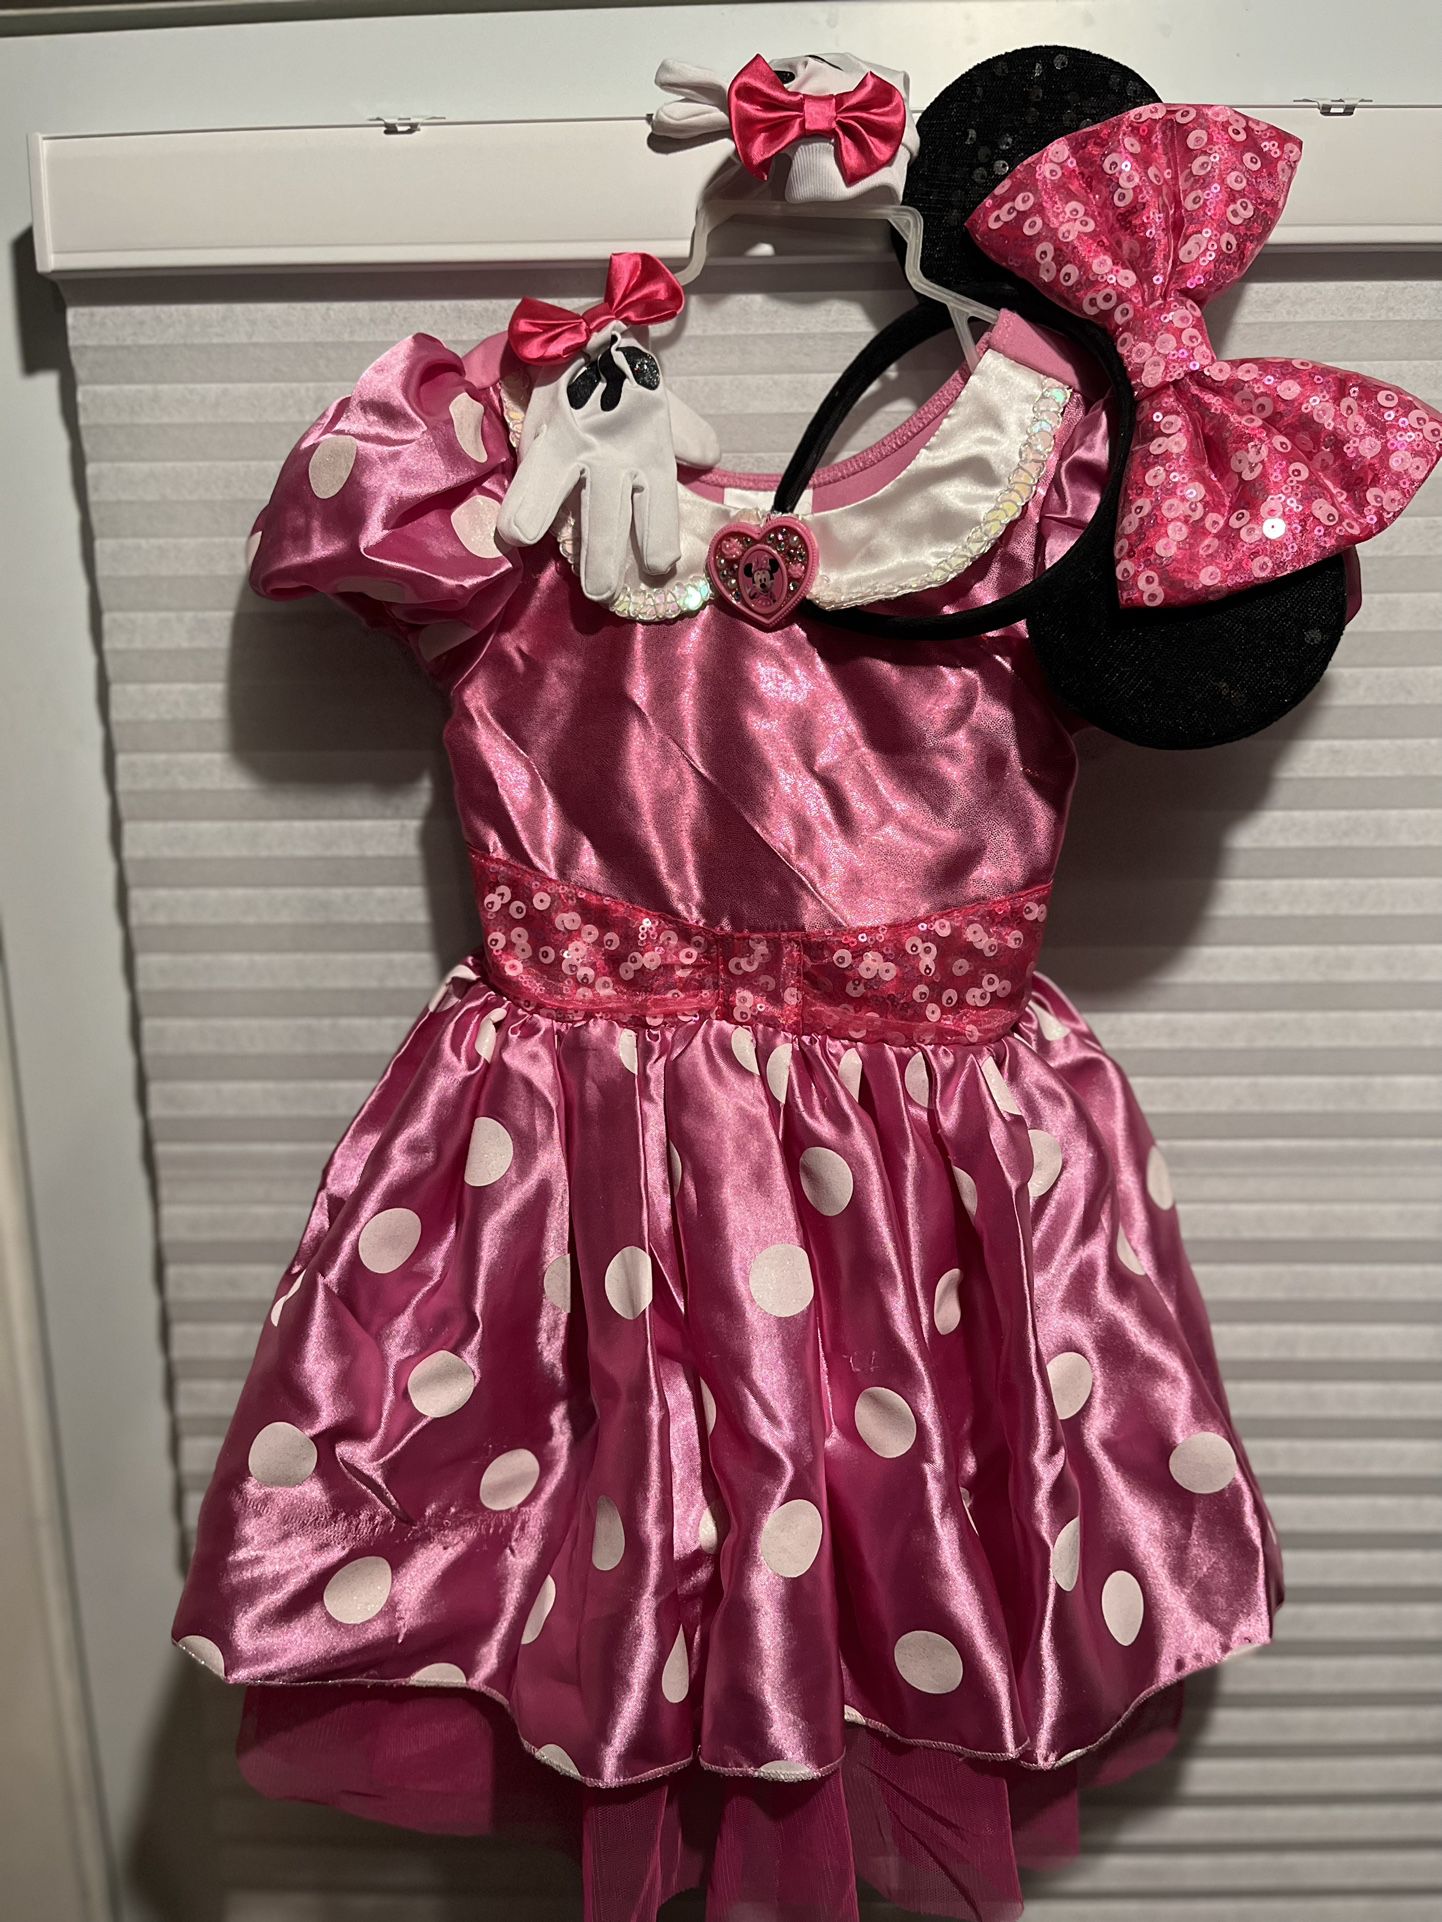 Size 3 Minnie Mouse Costume Pink Dress Outfit - Disney 